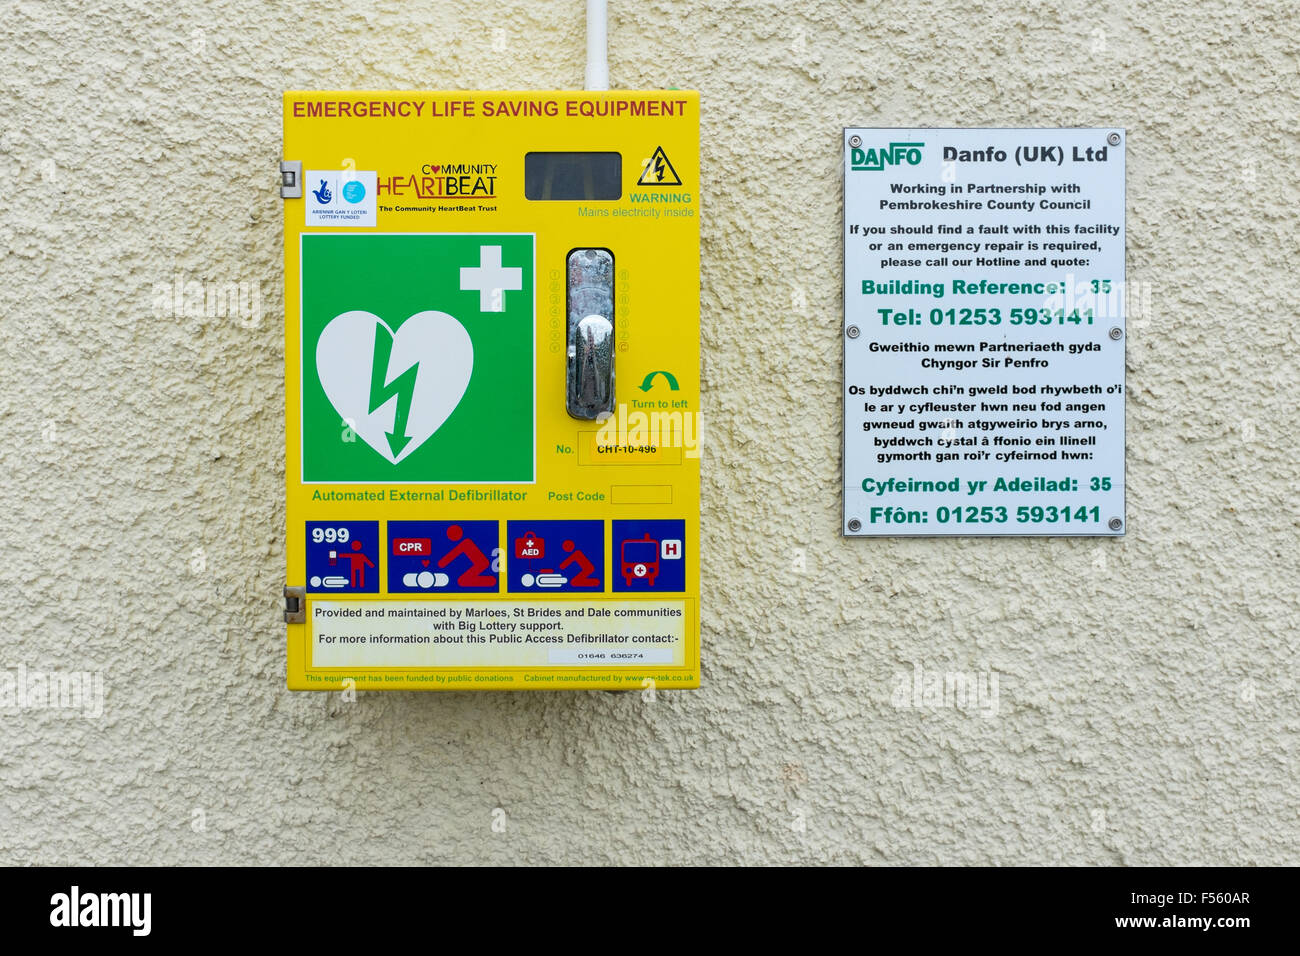 Emergency life saving equipment including a defibrillator mounted on a wall on the Pembrokeshire Coast Path National Trail Stock Photo